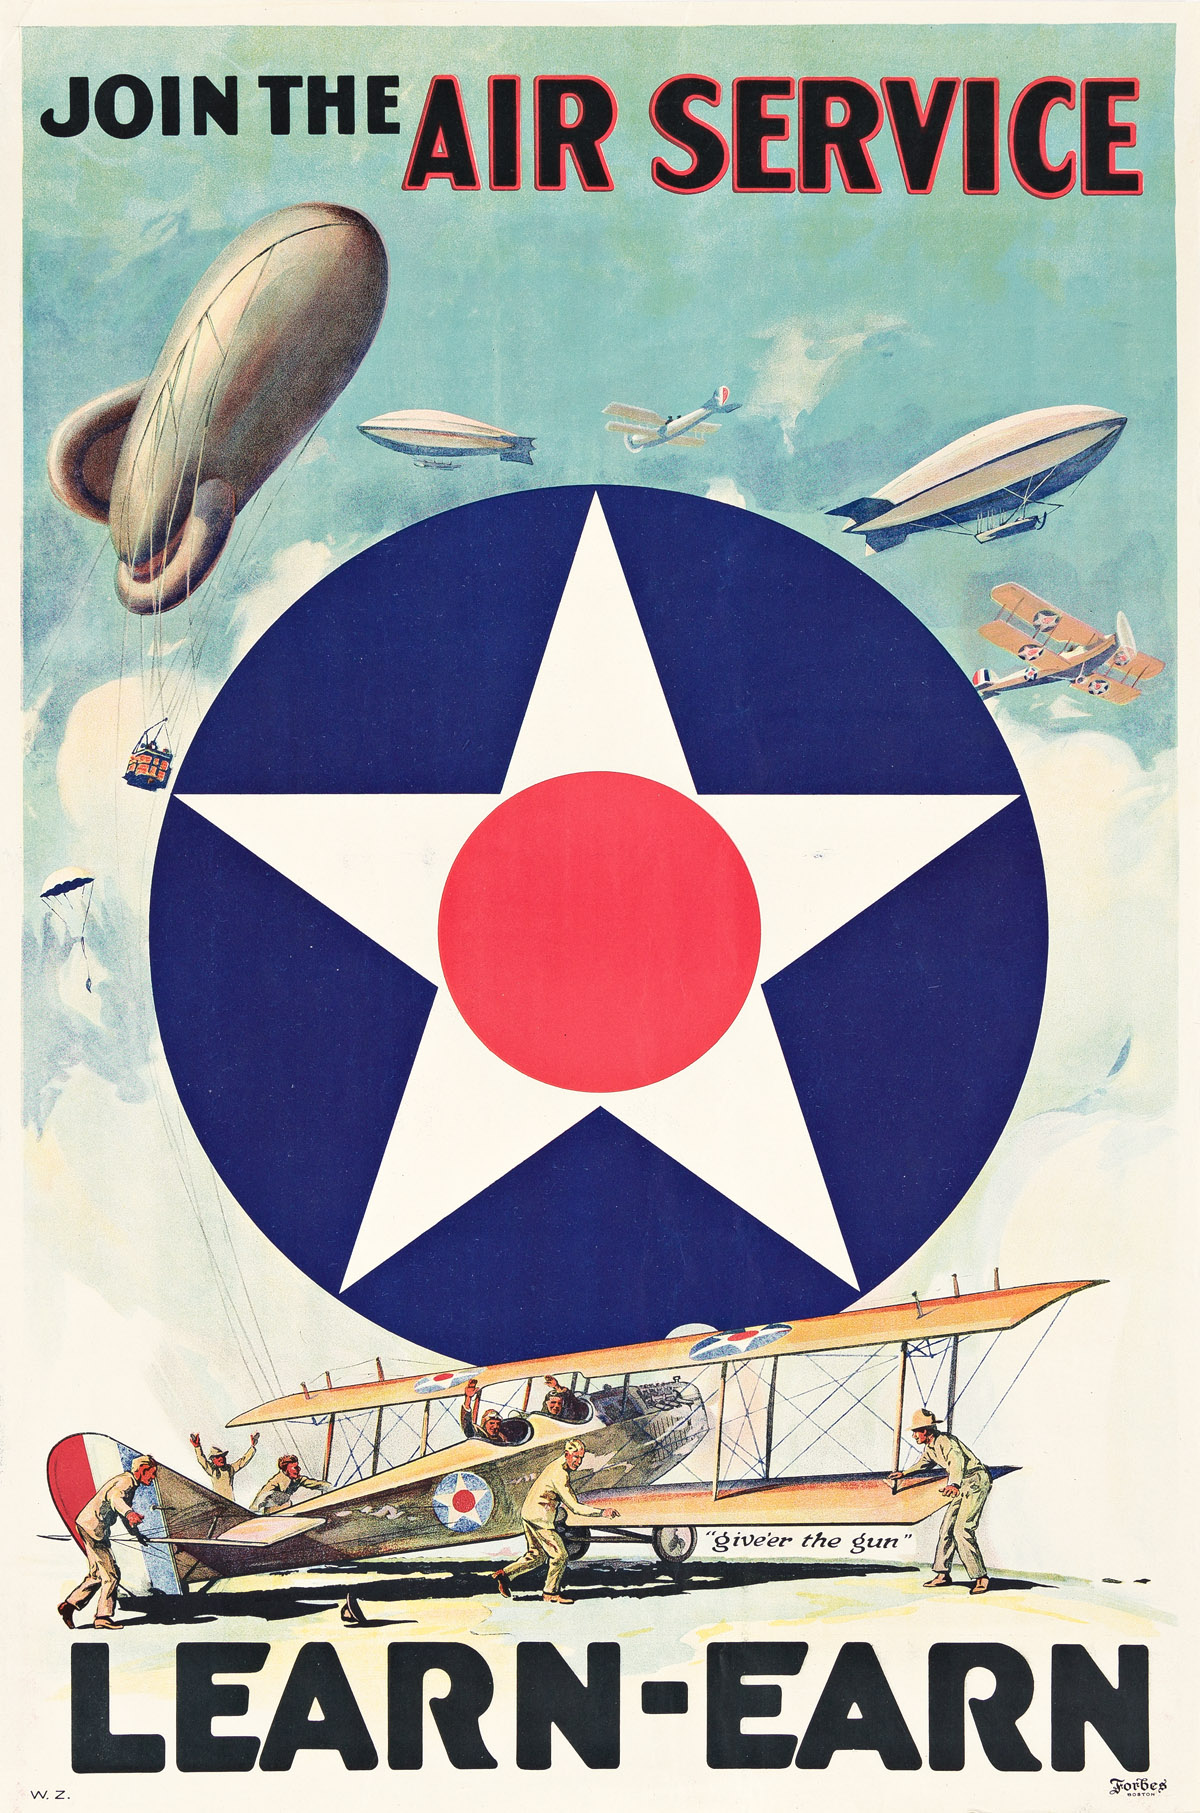 DESIGNER UNKNOWN.  JOIN THE AIR SERVICE / LEARN - EARN. Circa 1918. 30x20 inches; 76¼x51 cm. Forbes, Boston.